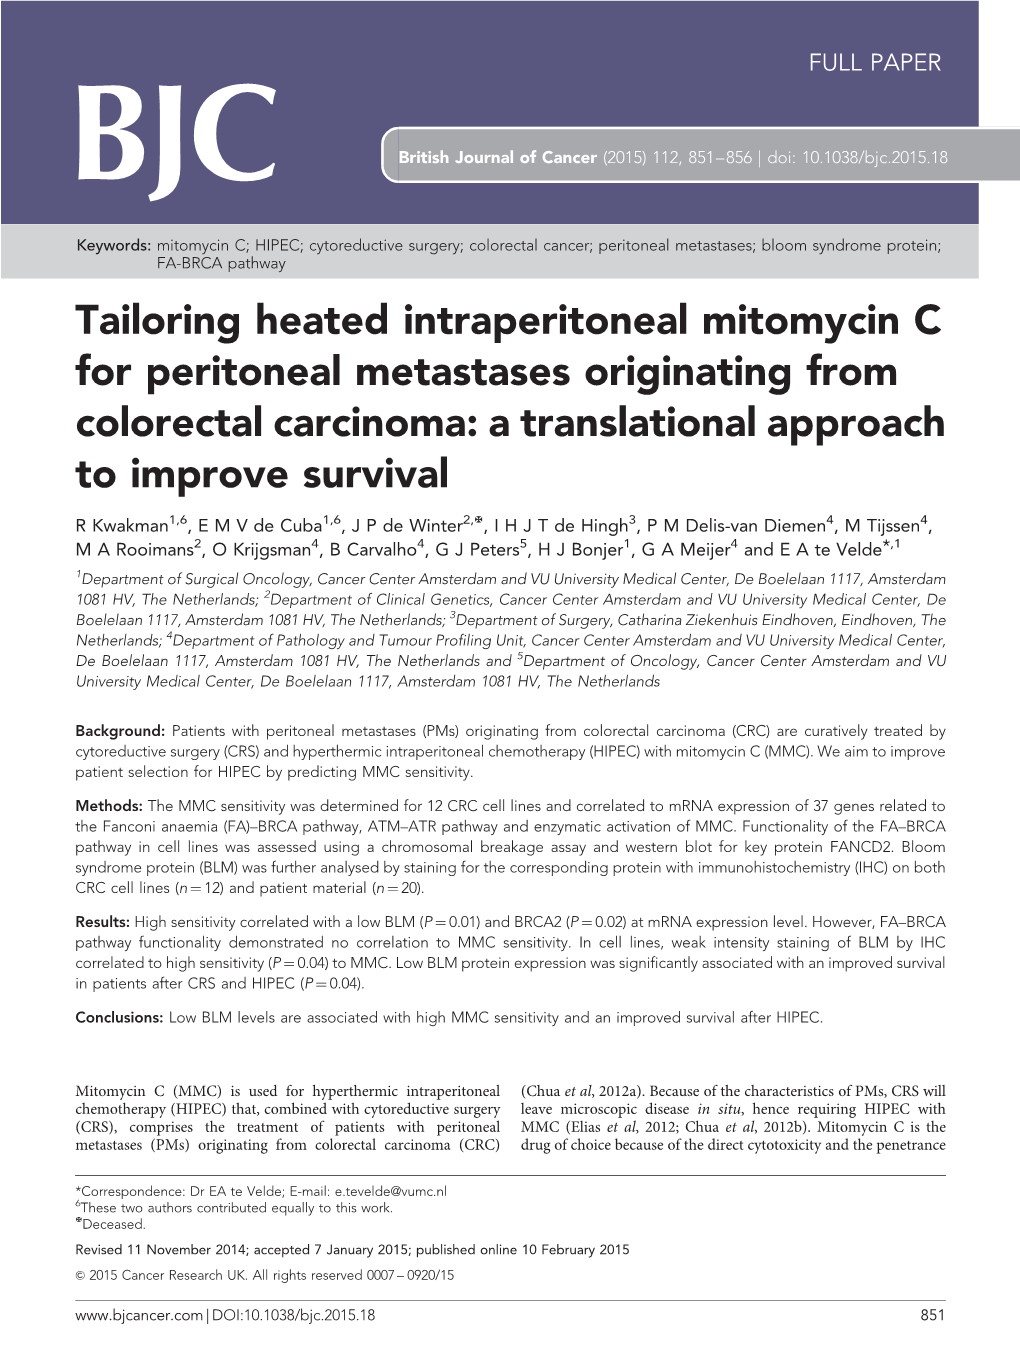 Tailoring Heated Intraperitoneal Mitomycin C for Peritoneal Metastases Originating from Colorectal Carcinoma: a Translational Approach to Improve Survival